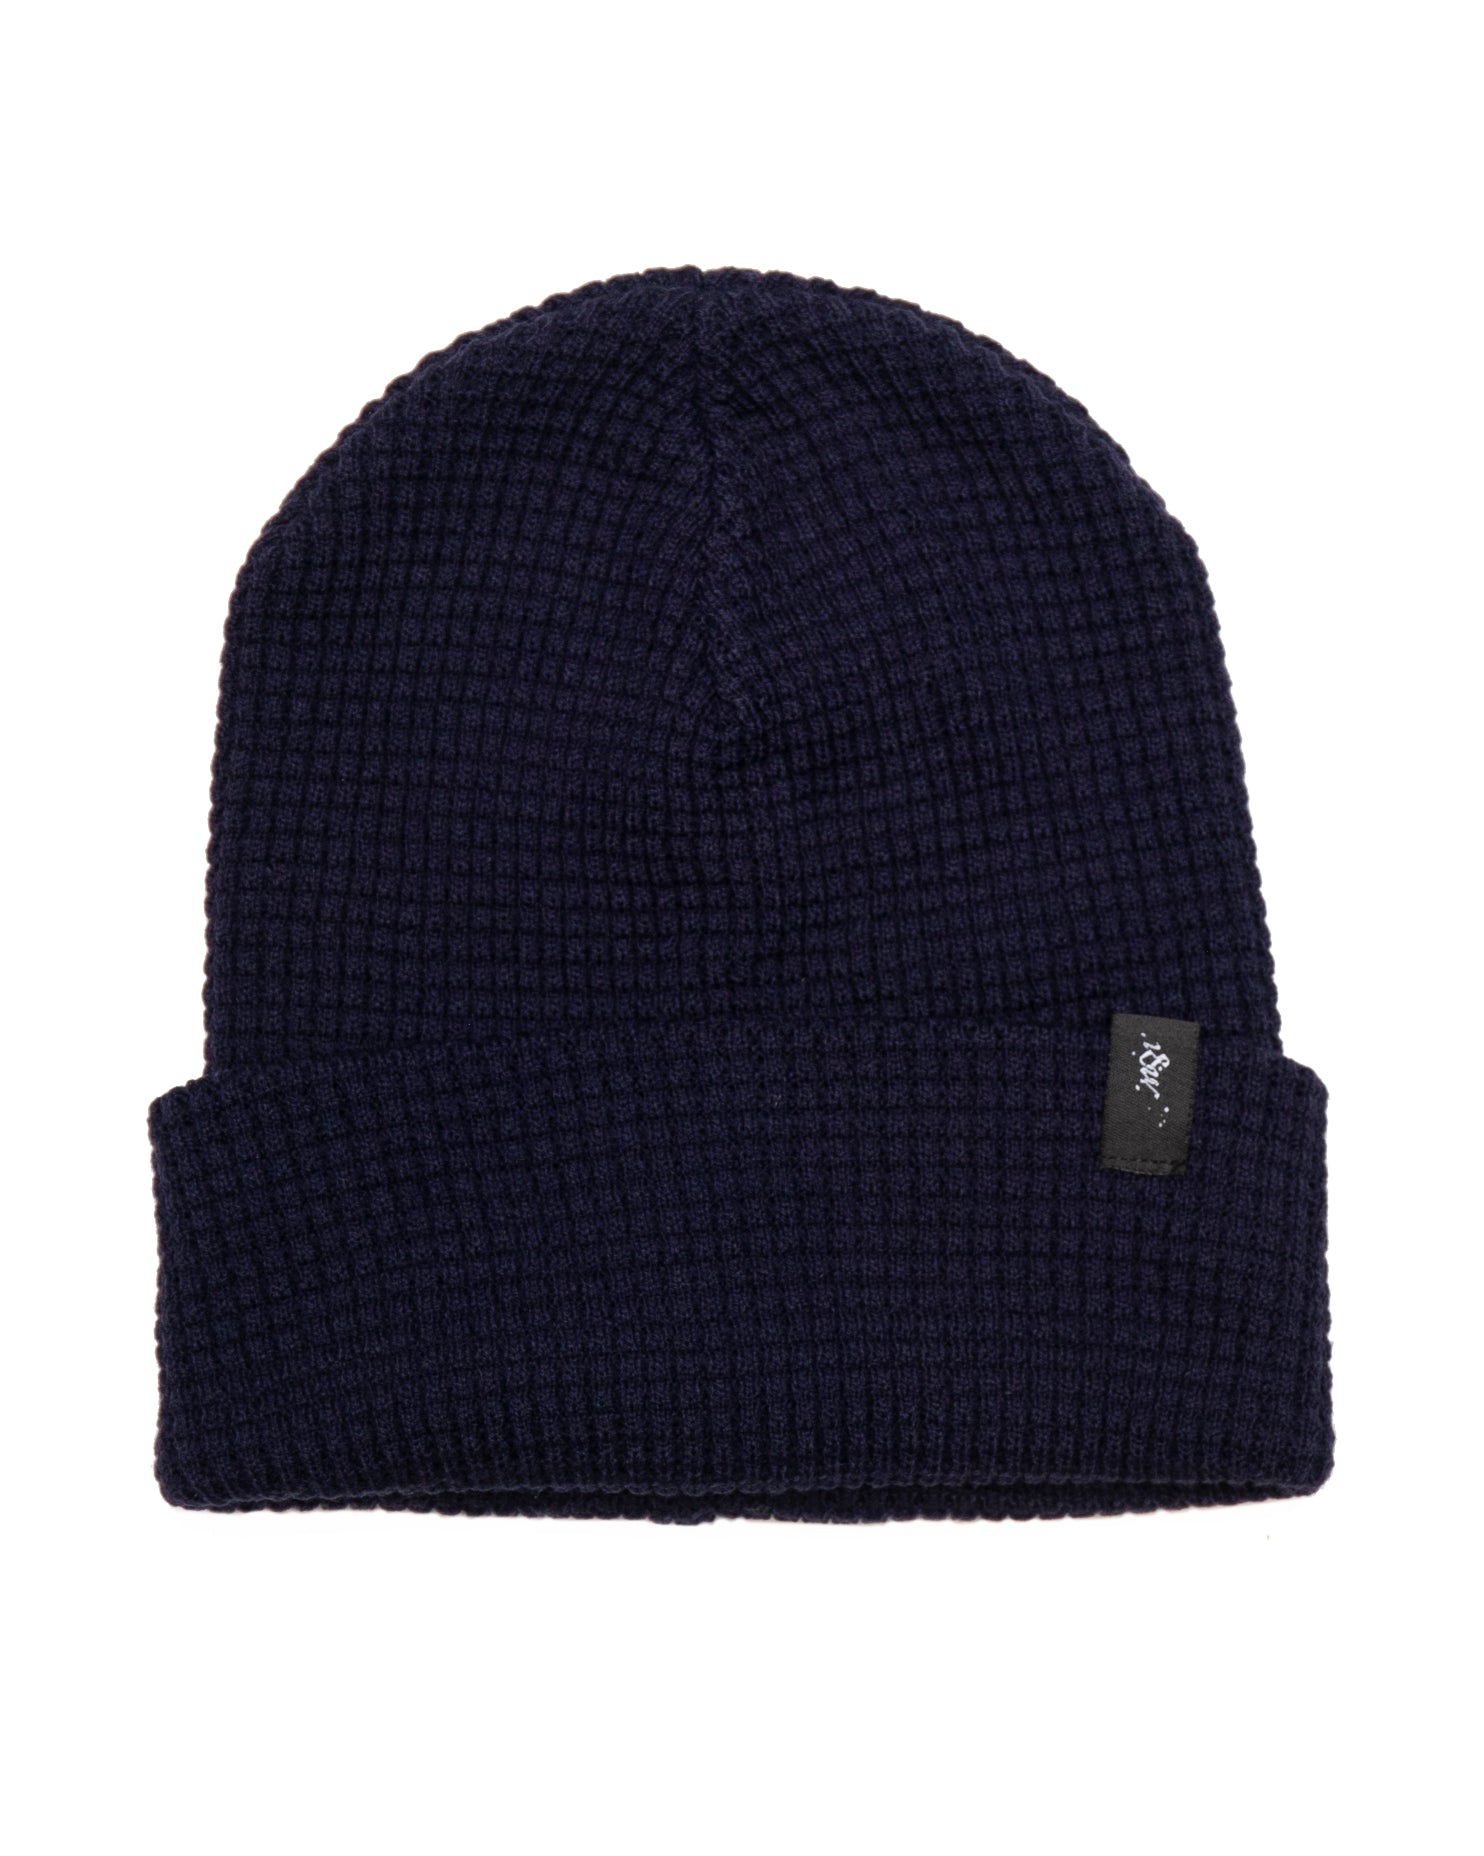 The Toque | Navy Waffle Knit